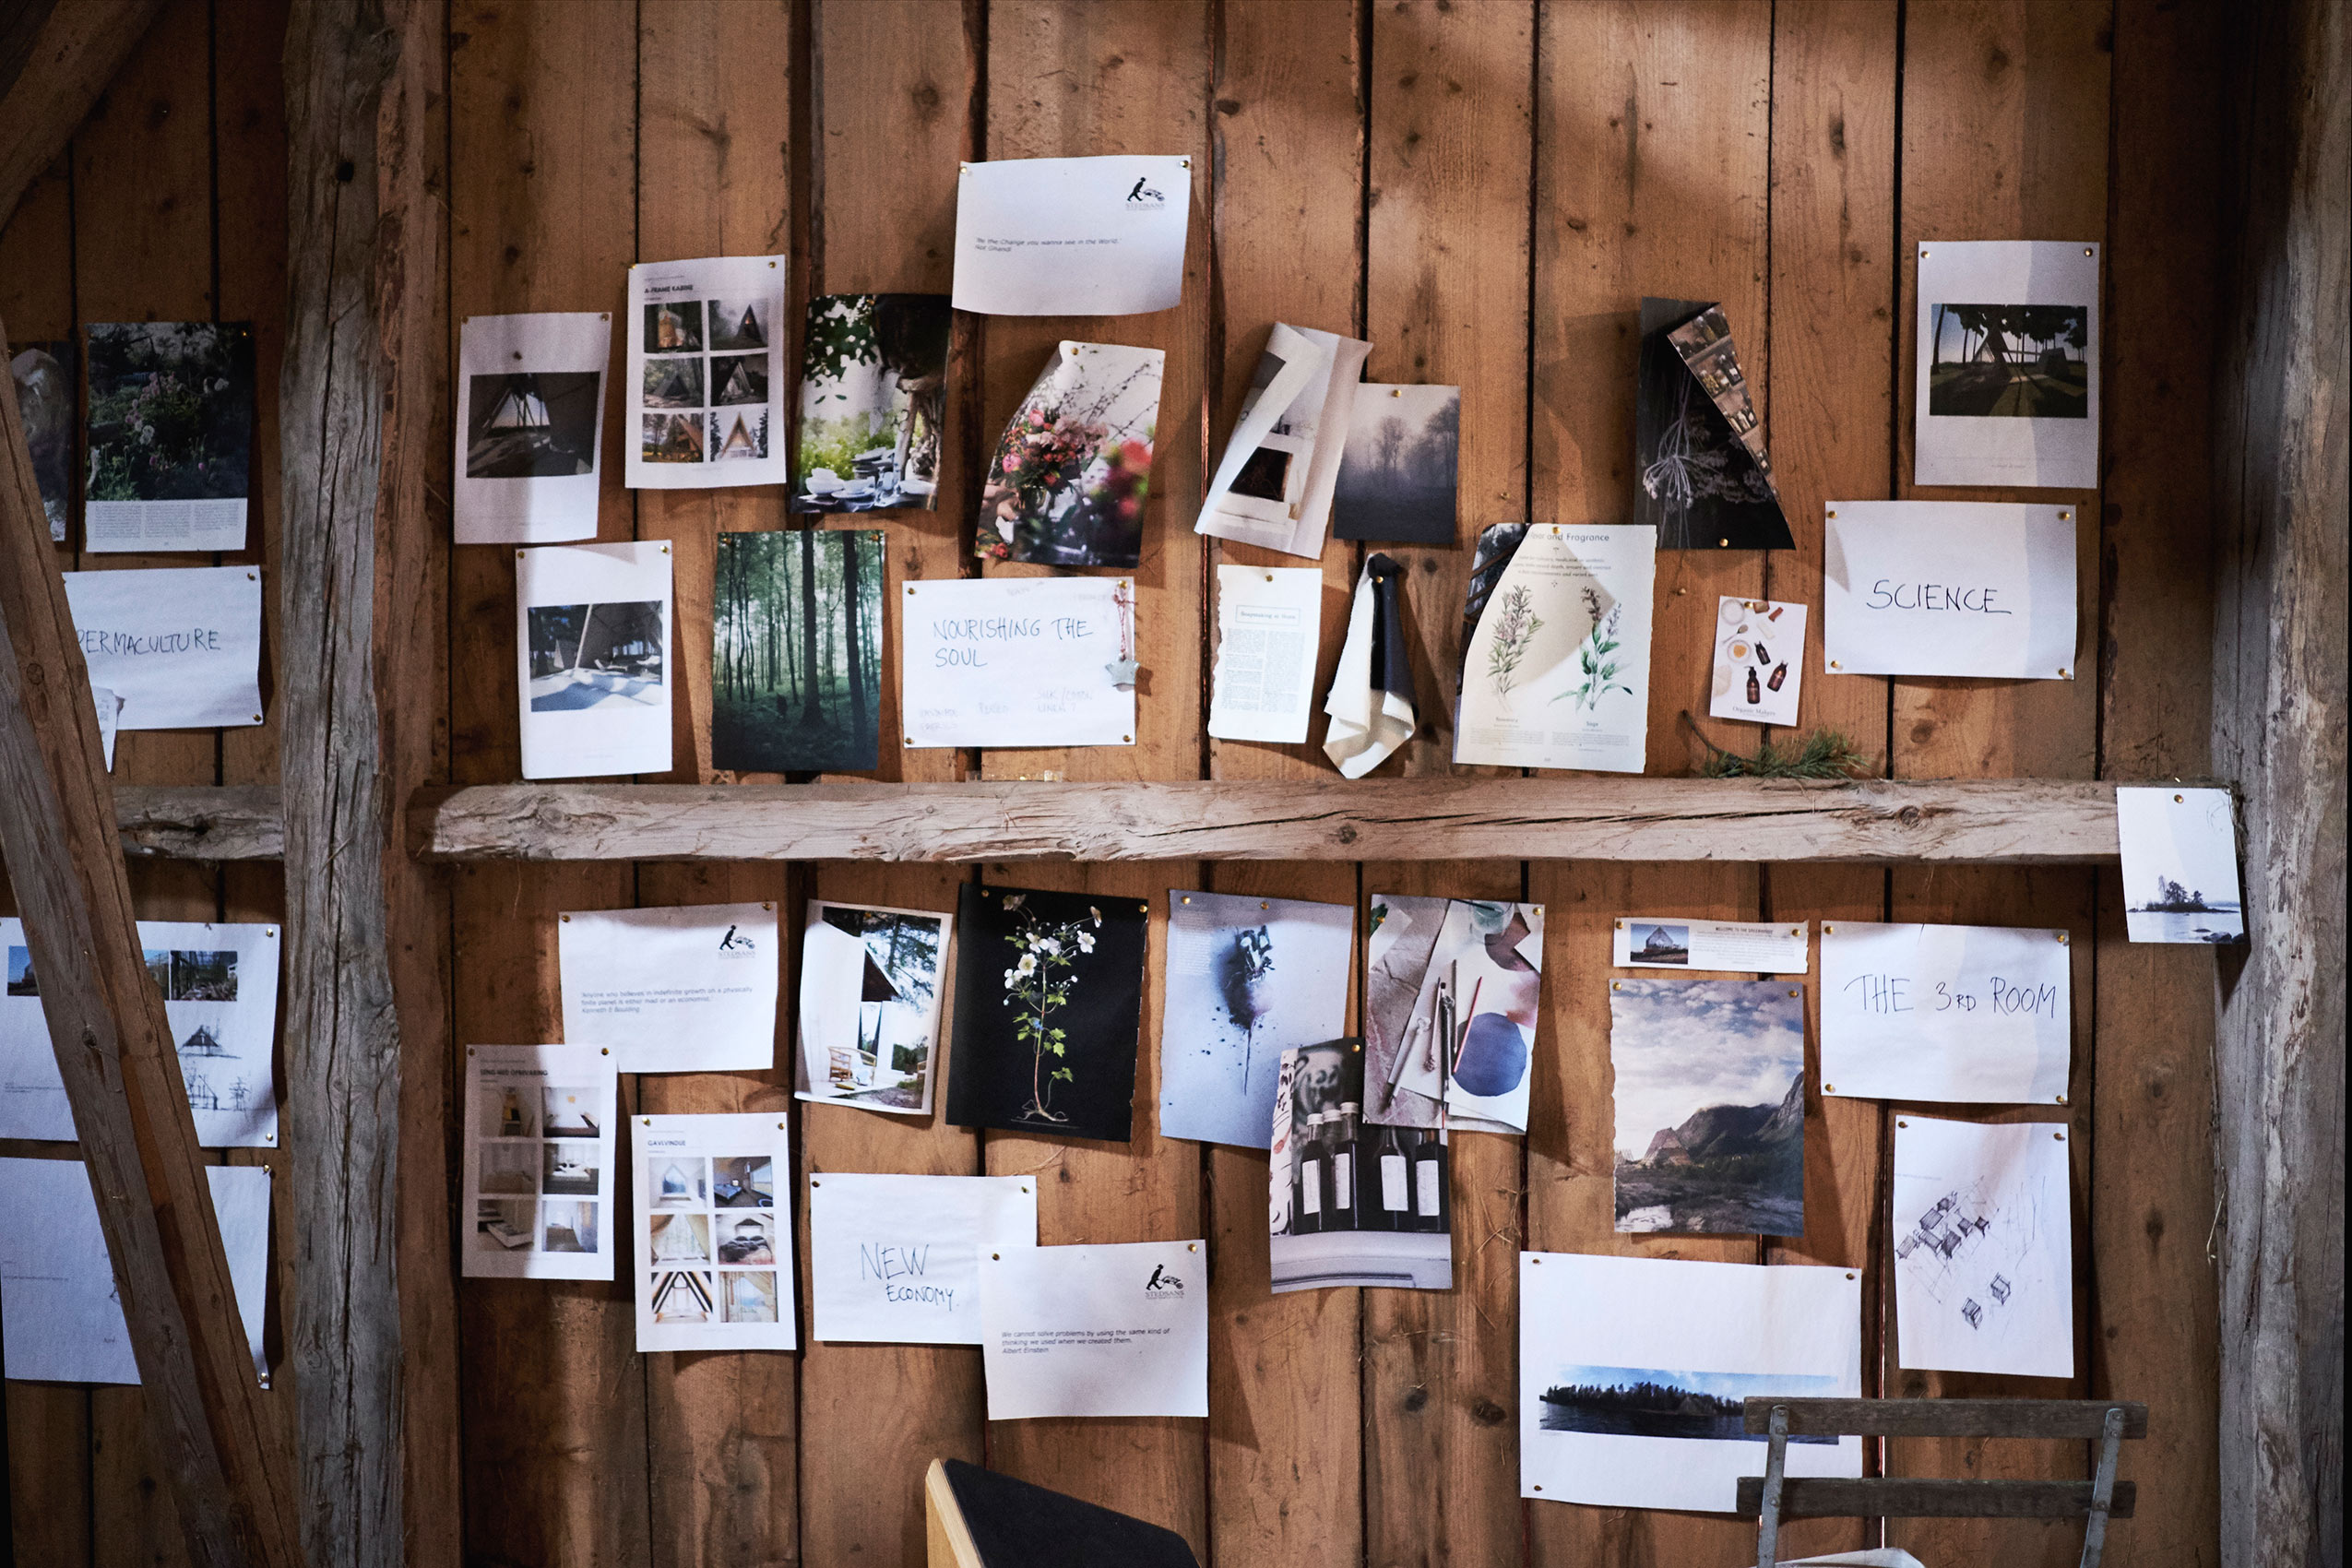 Stedsans in the Woods • Mood Board with Pins on Wooden Cabin Wall • Lifestyle & Editorial Food Photography